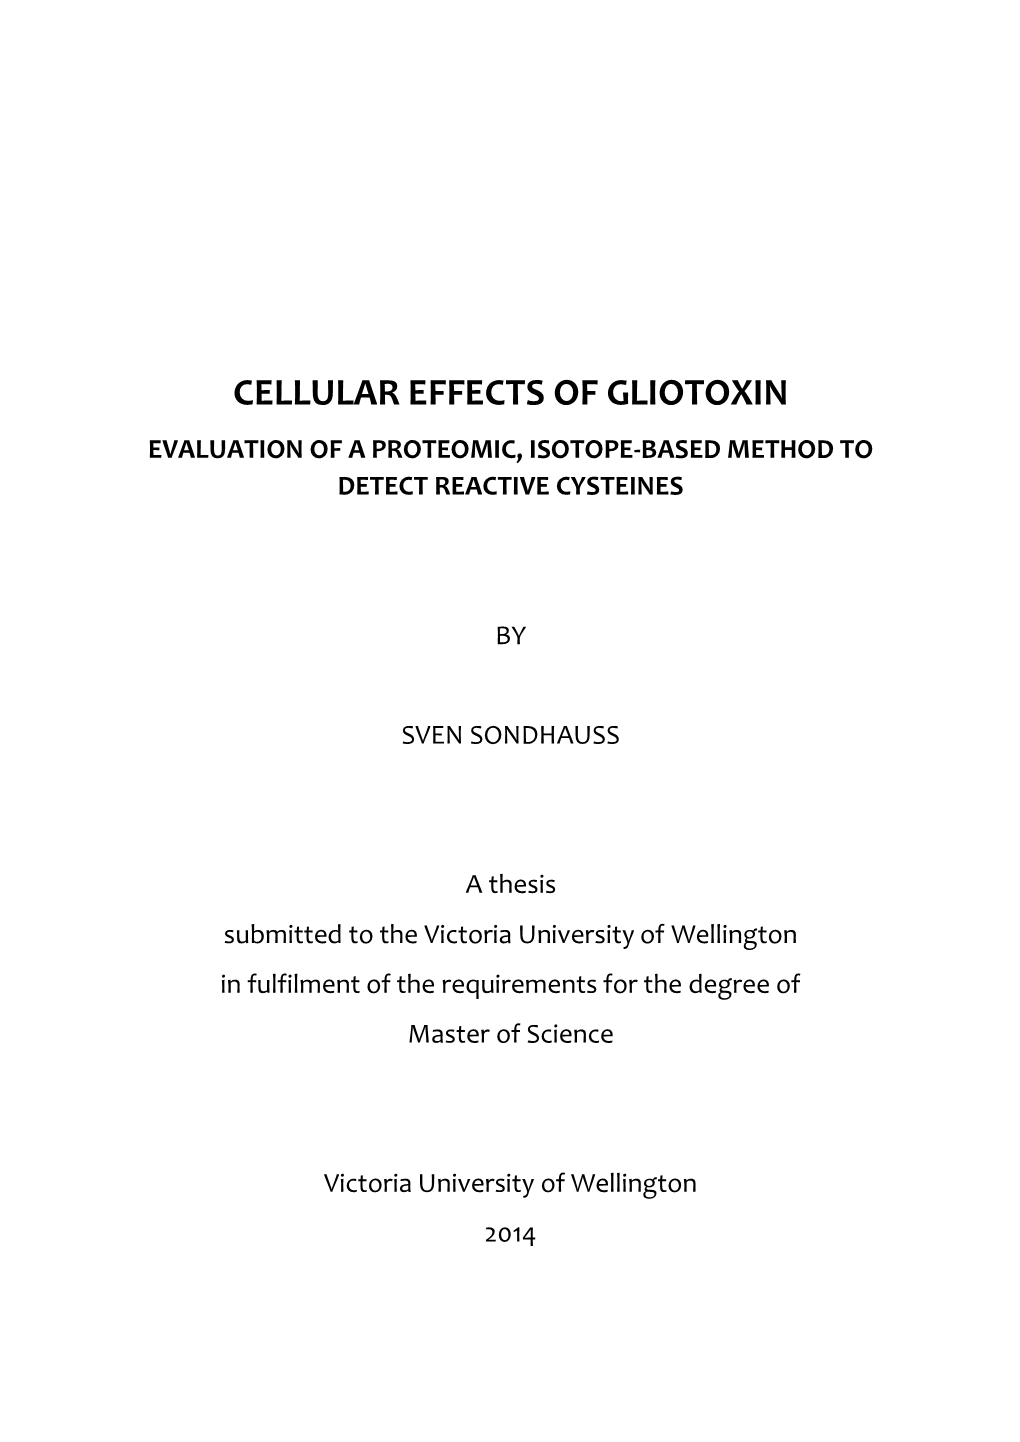 Cellular Effects of Gliotoxin Evaluation of a Proteomic, Isotope-Based Method to Detect Reactive Cysteines